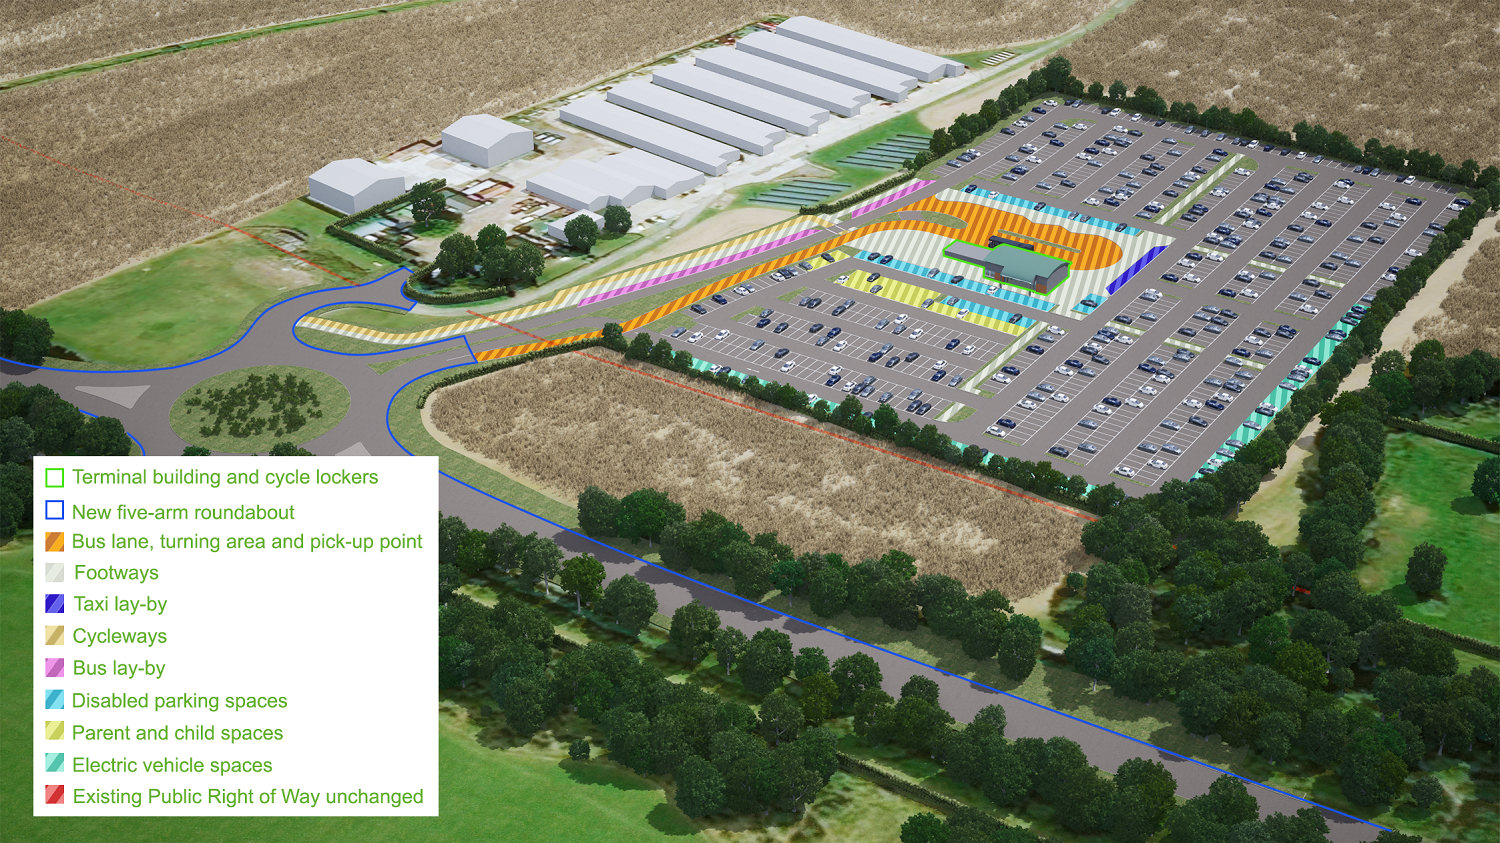 Images showing the layout of the Widford Park and Ride Greenbury way option with a key